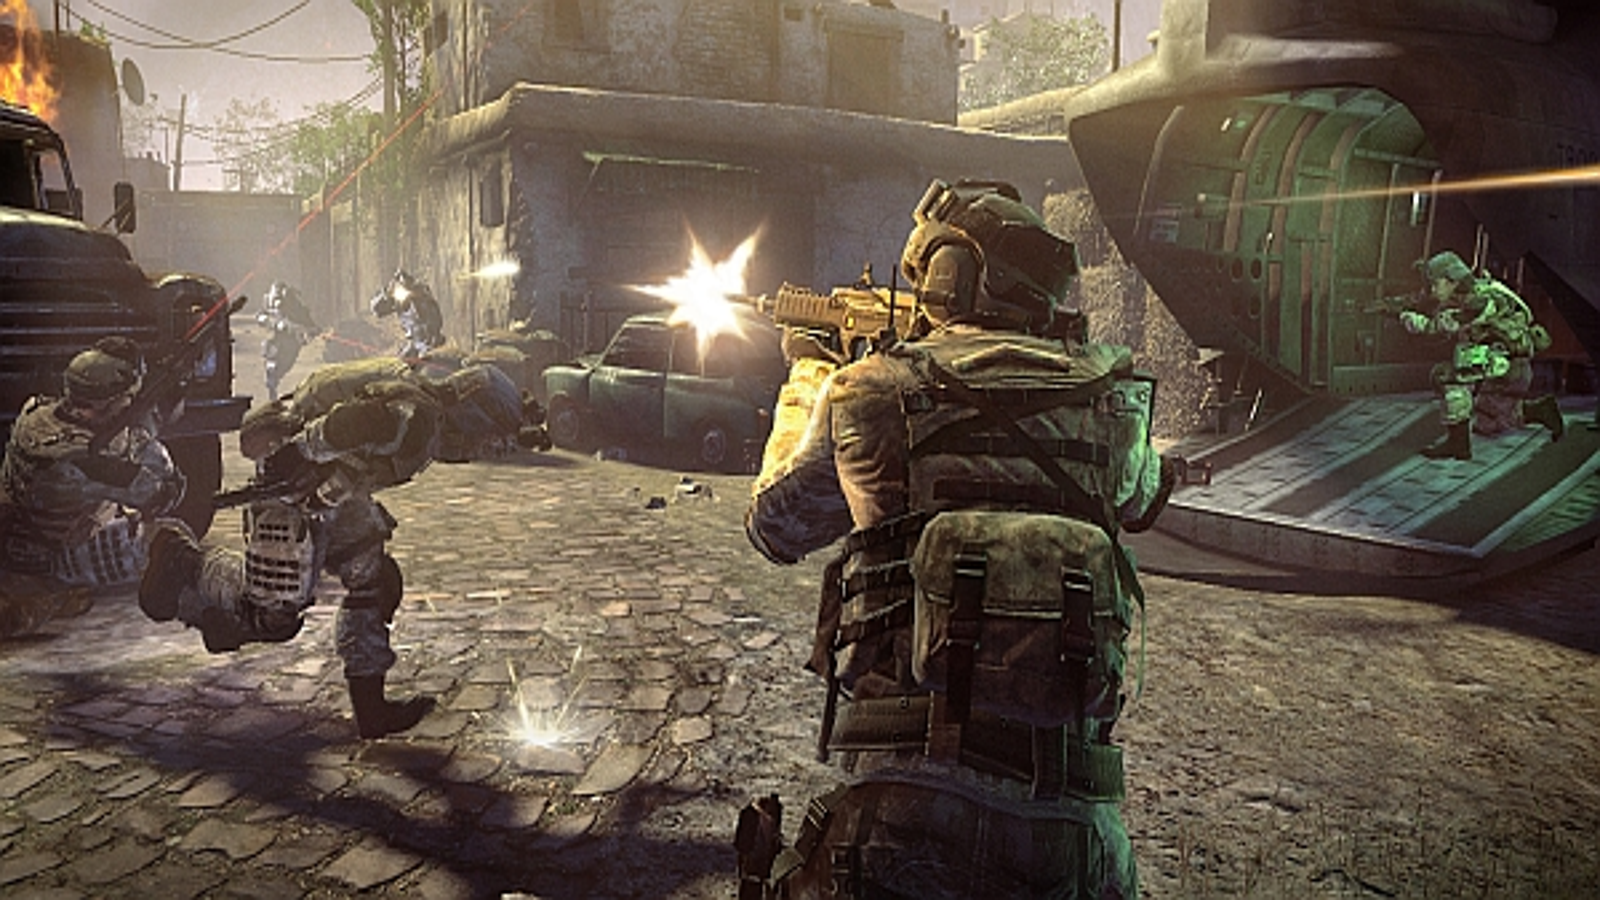 Warface Preview - A Free FPS That Looks And Plays Great - Game Informer